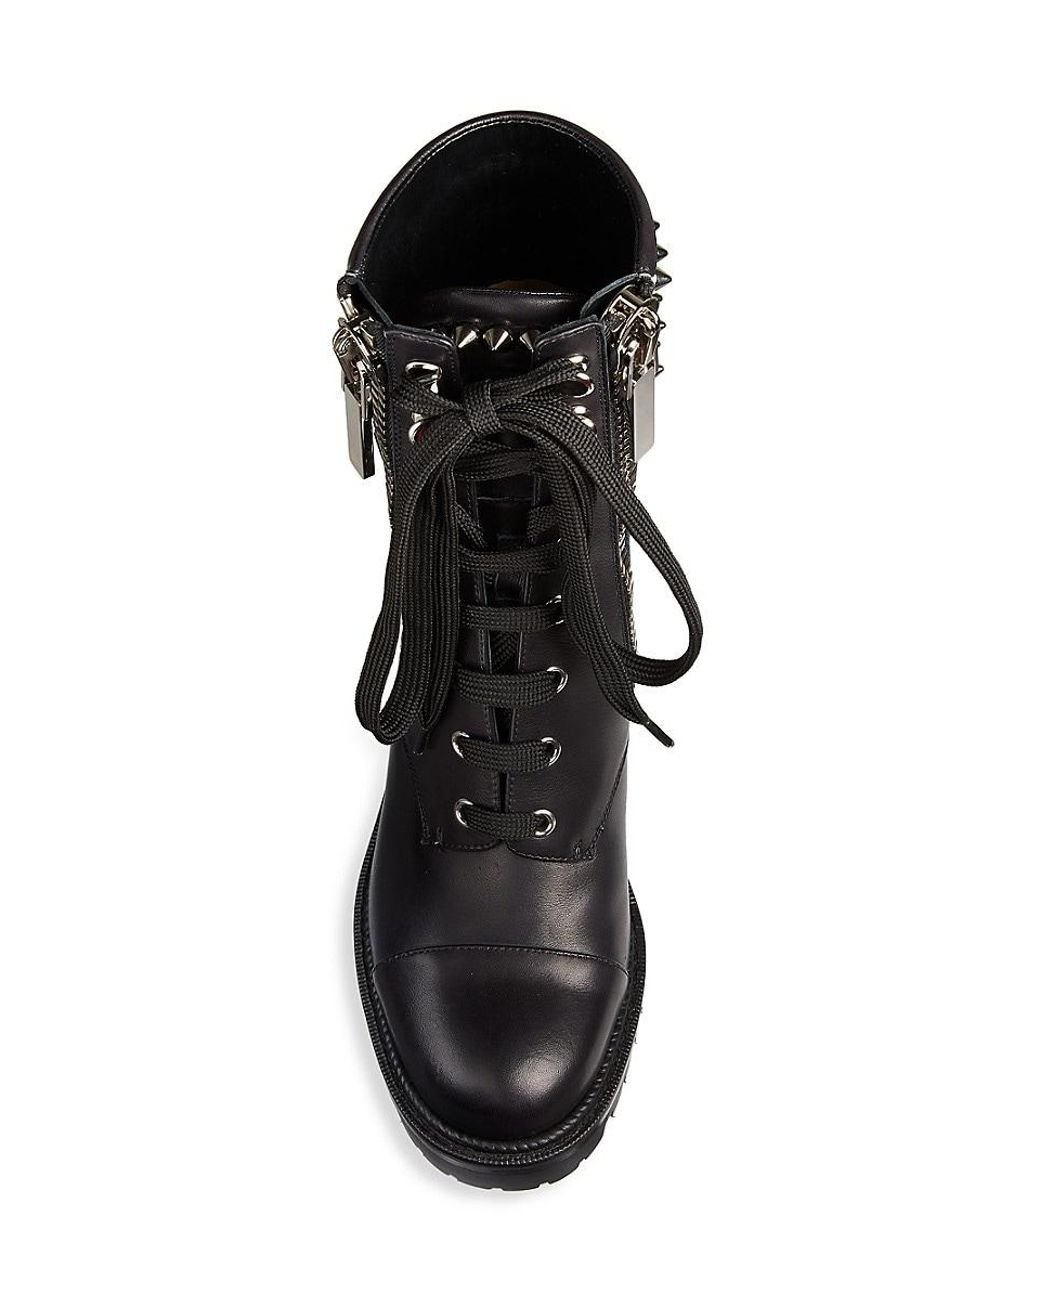 Christian Louboutin Leather Studded Accents Combat Boots